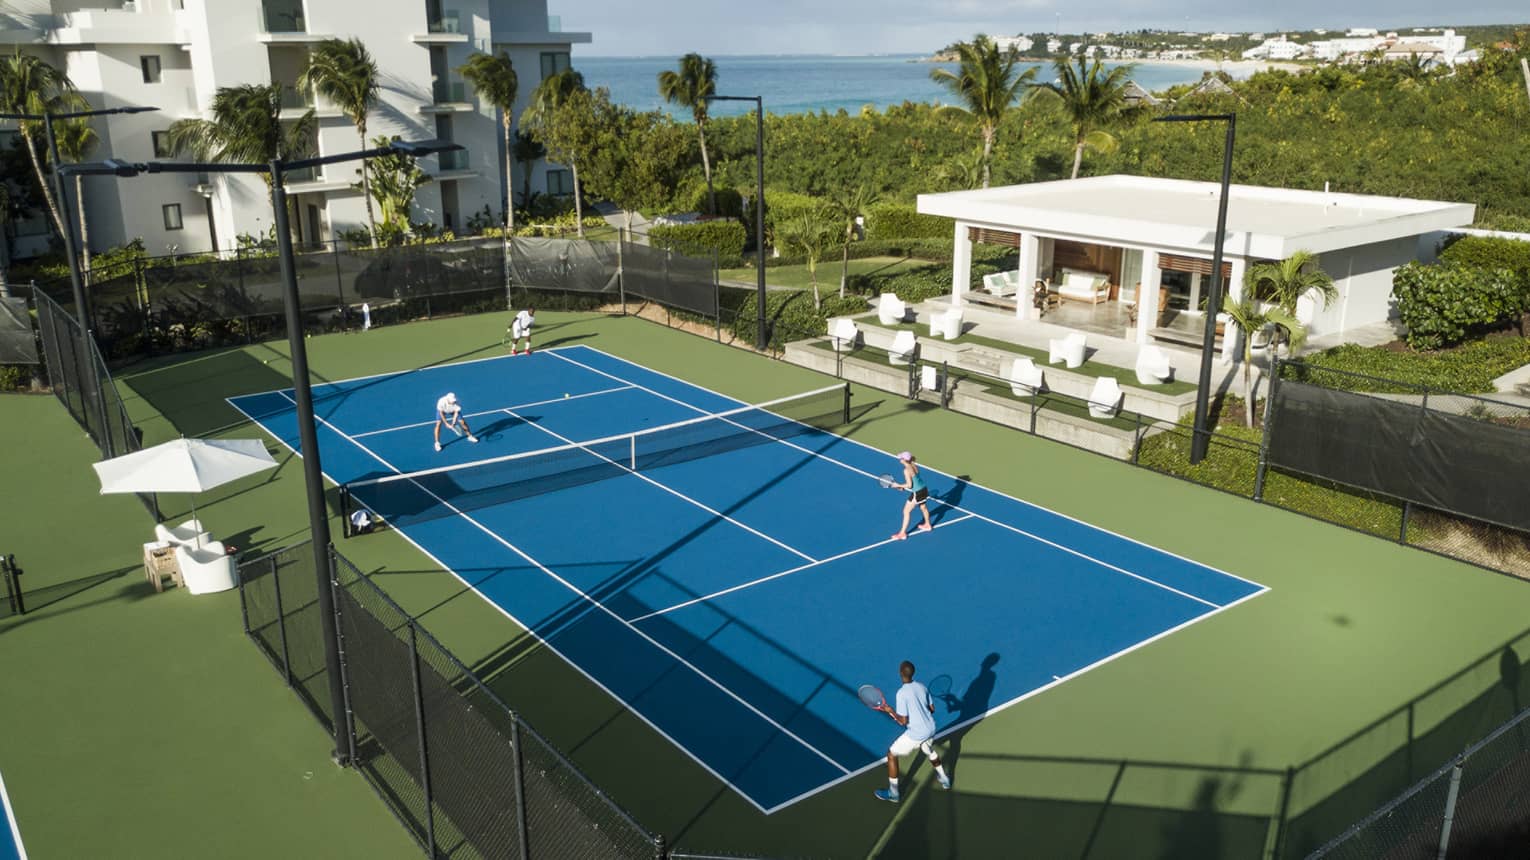 Aerial view of a doubles match on a blue tennis court, with green bordering, palm trees